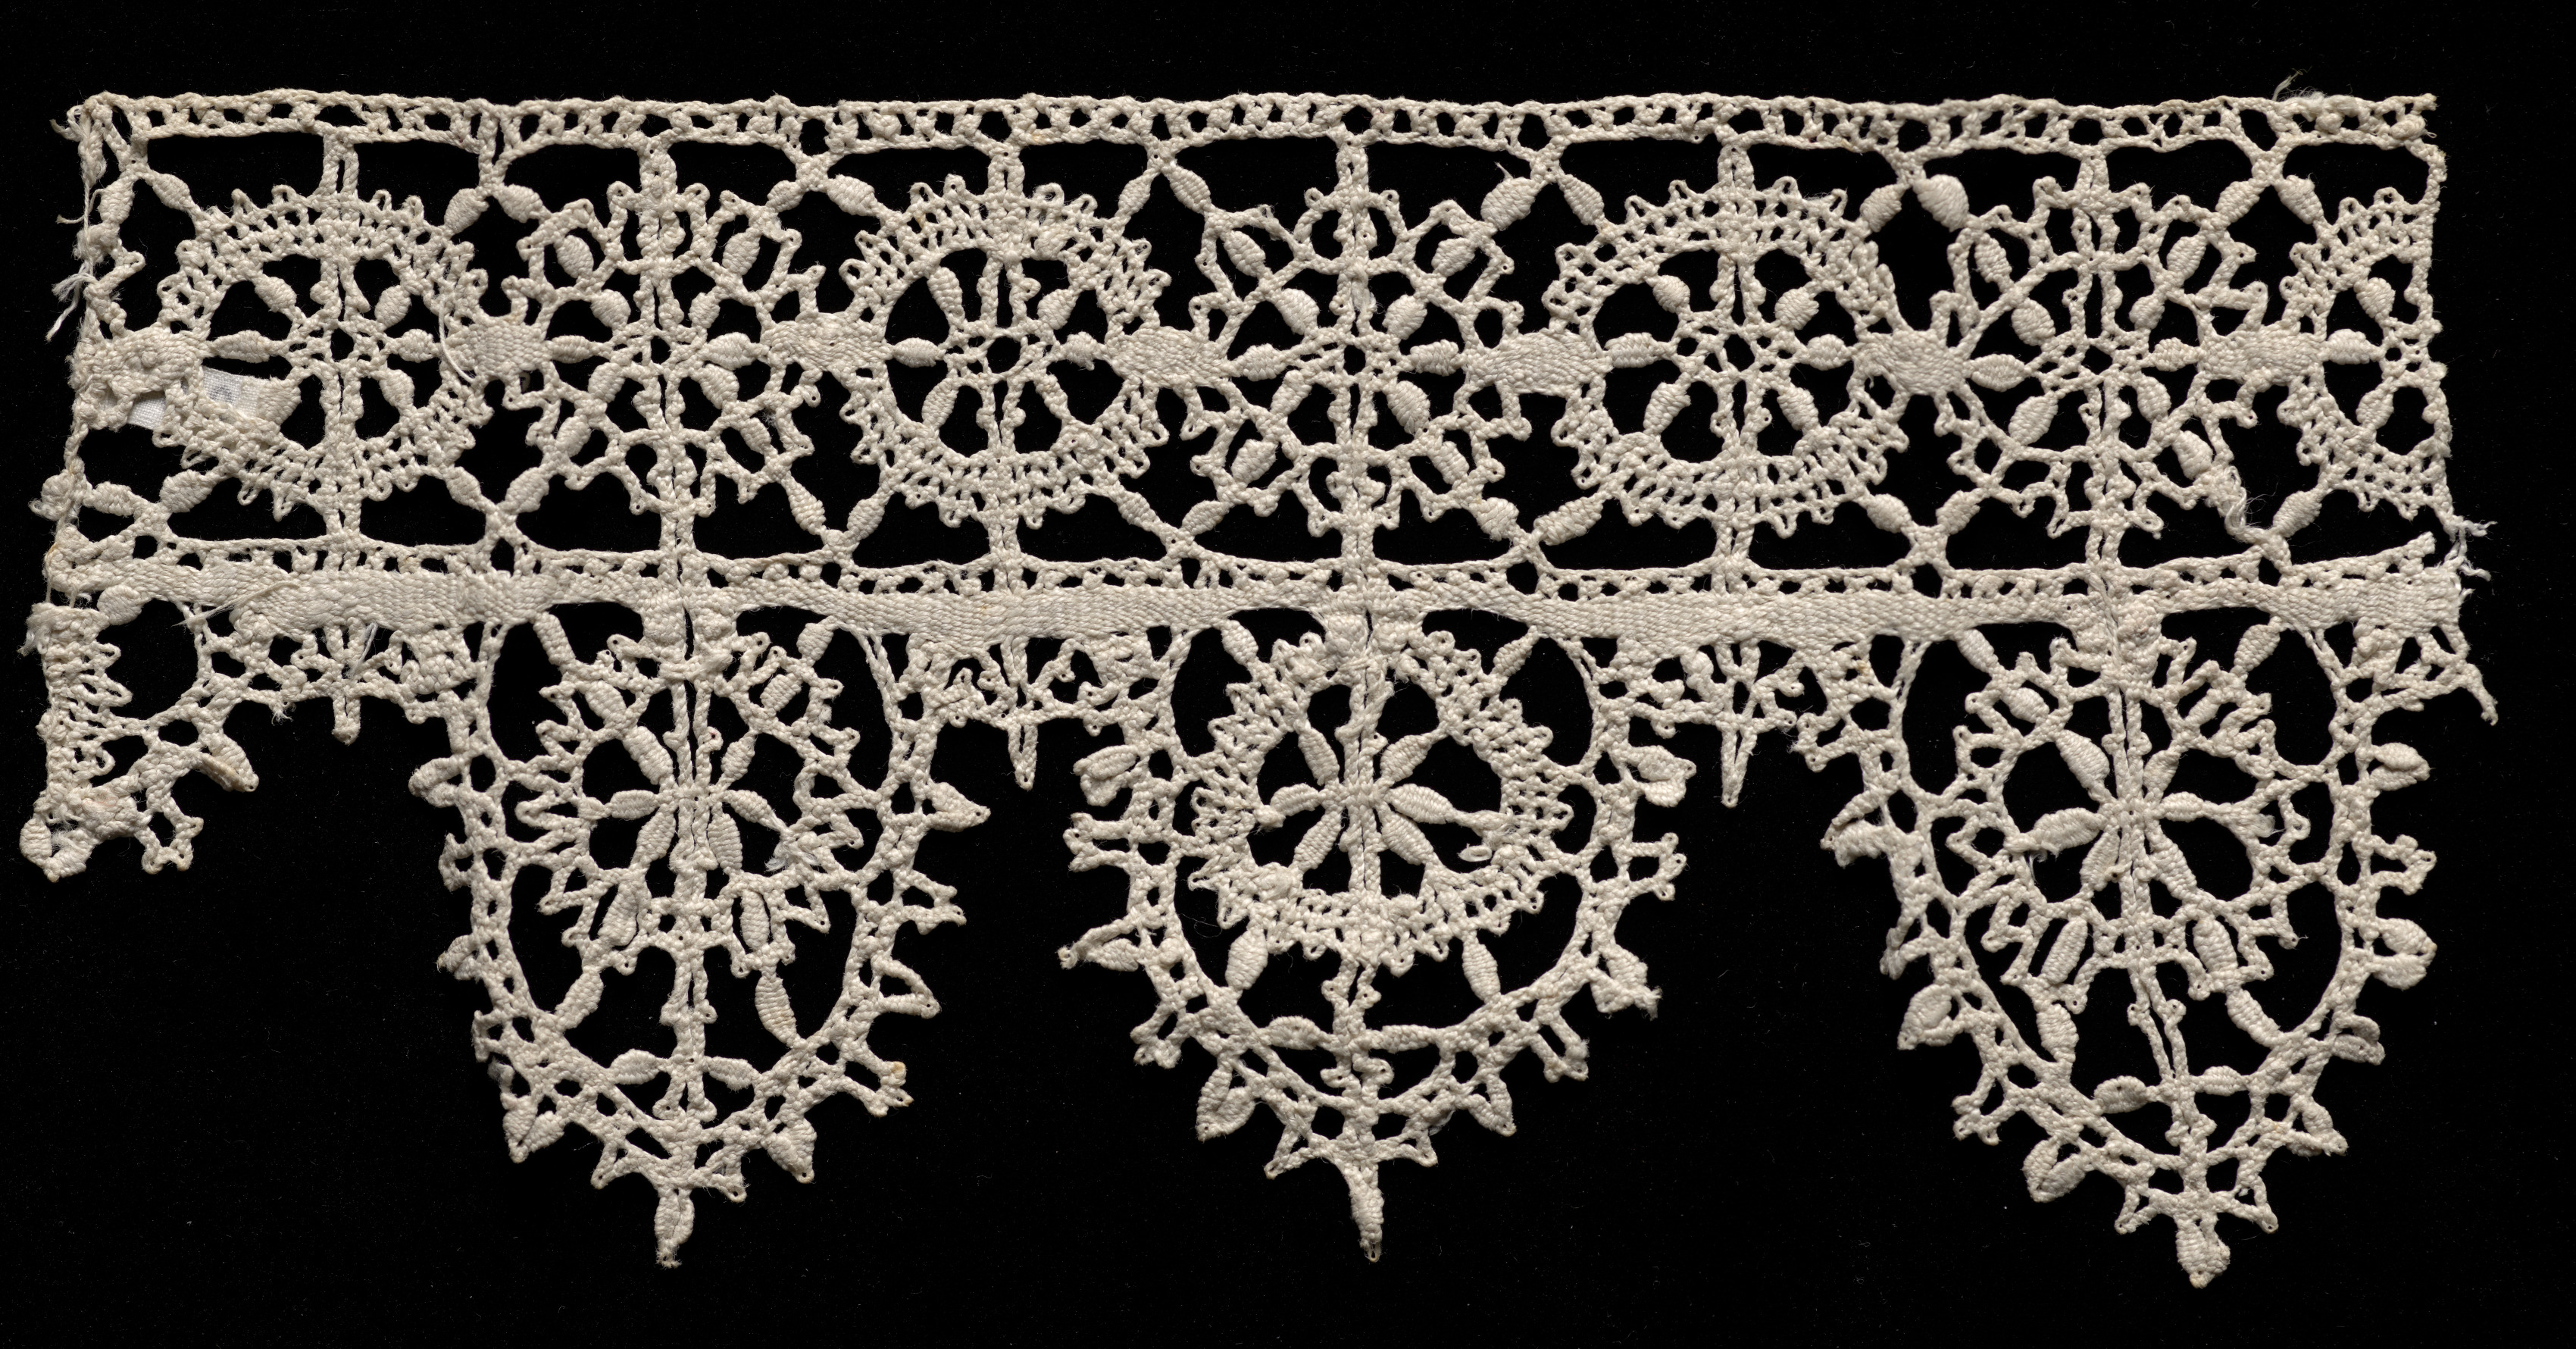 Bobbin Lace (Rose Lace) Insertion and Edging of Points